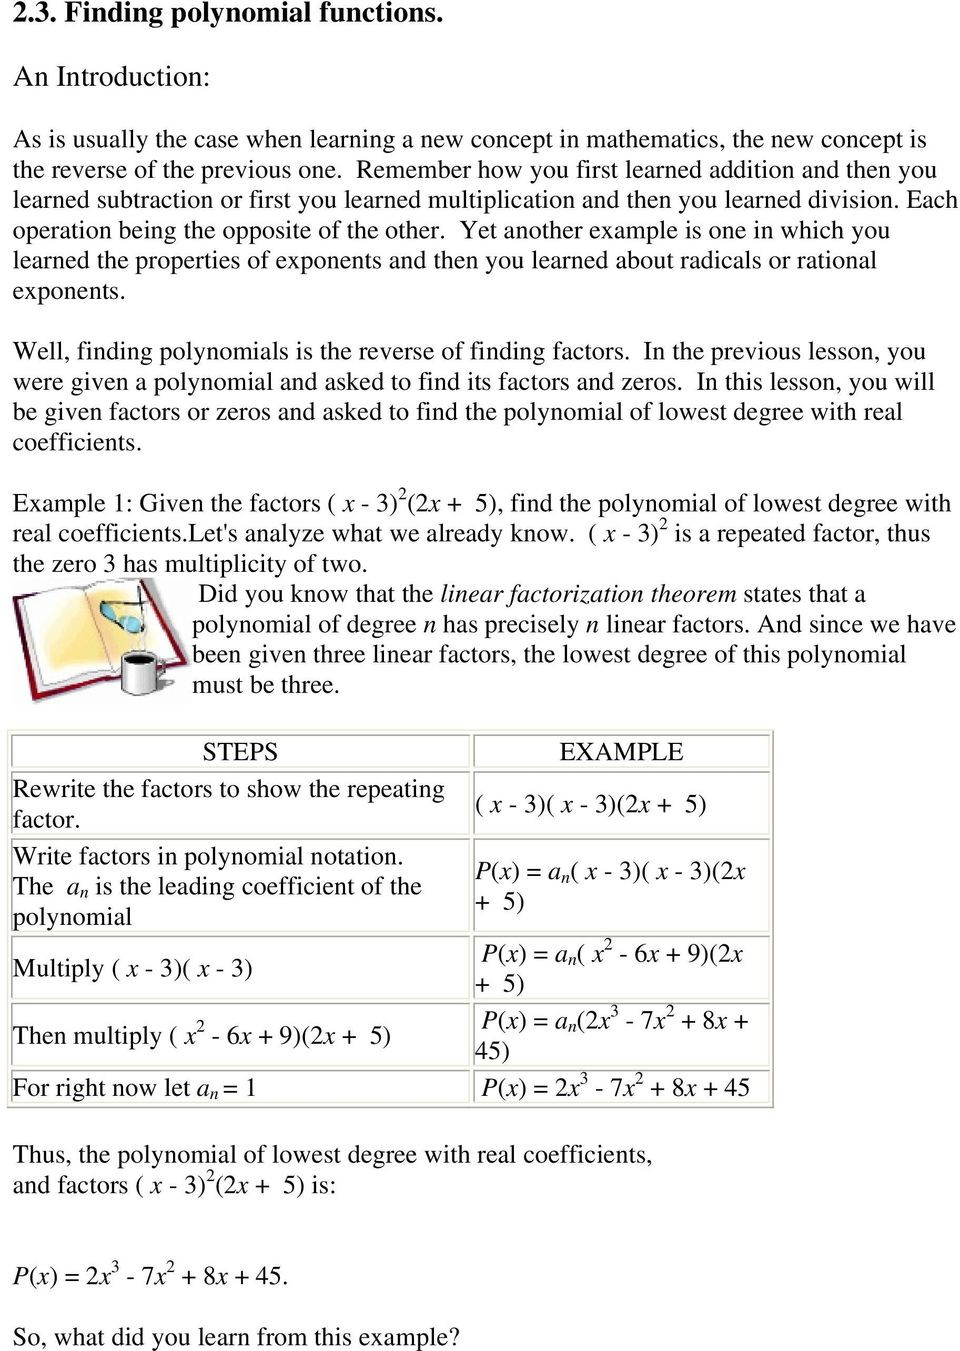 Operations with Polynomials Worksheet 2 3 Finding Polynomial Functions An Introduction Pdf